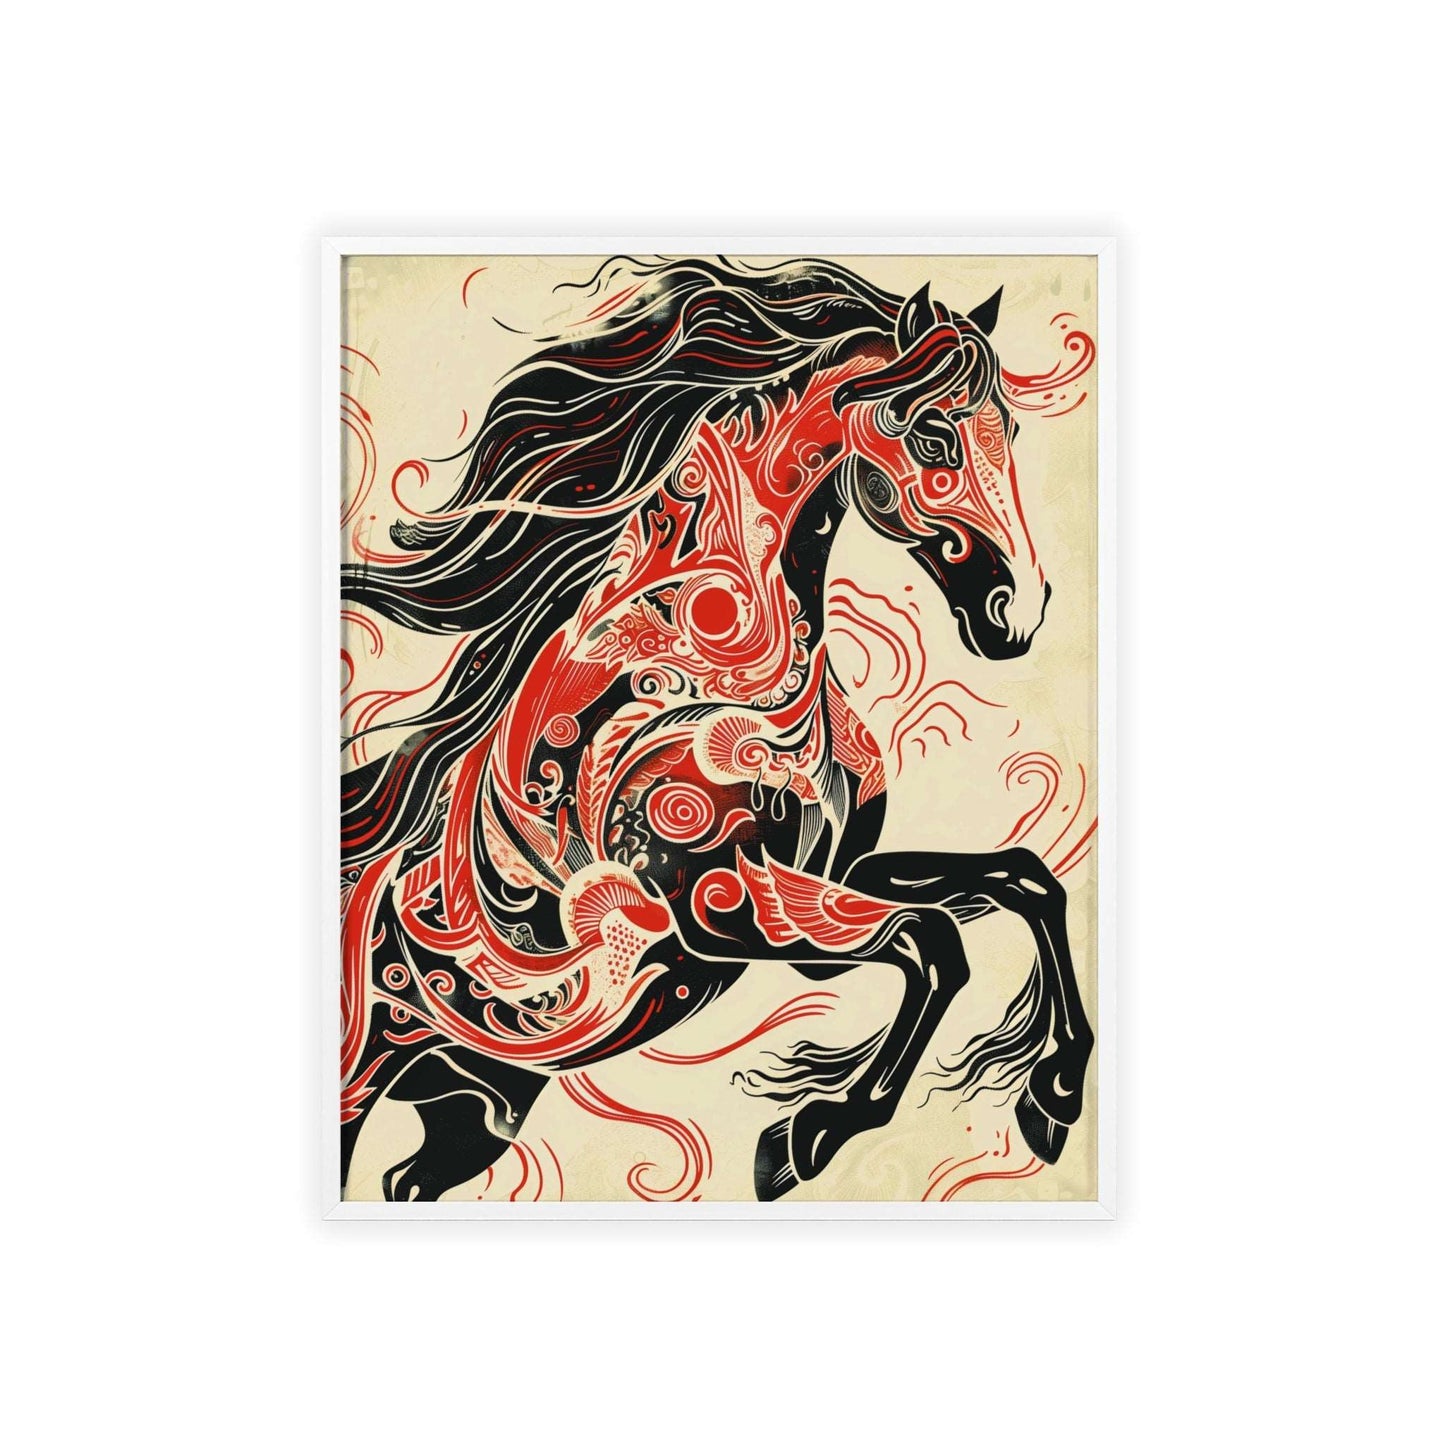 wild horse poster, animal art, bold design, black and red, wildlife decor, intricate patterns, majestic horse, nature illustration, wall art, dynamic artwork